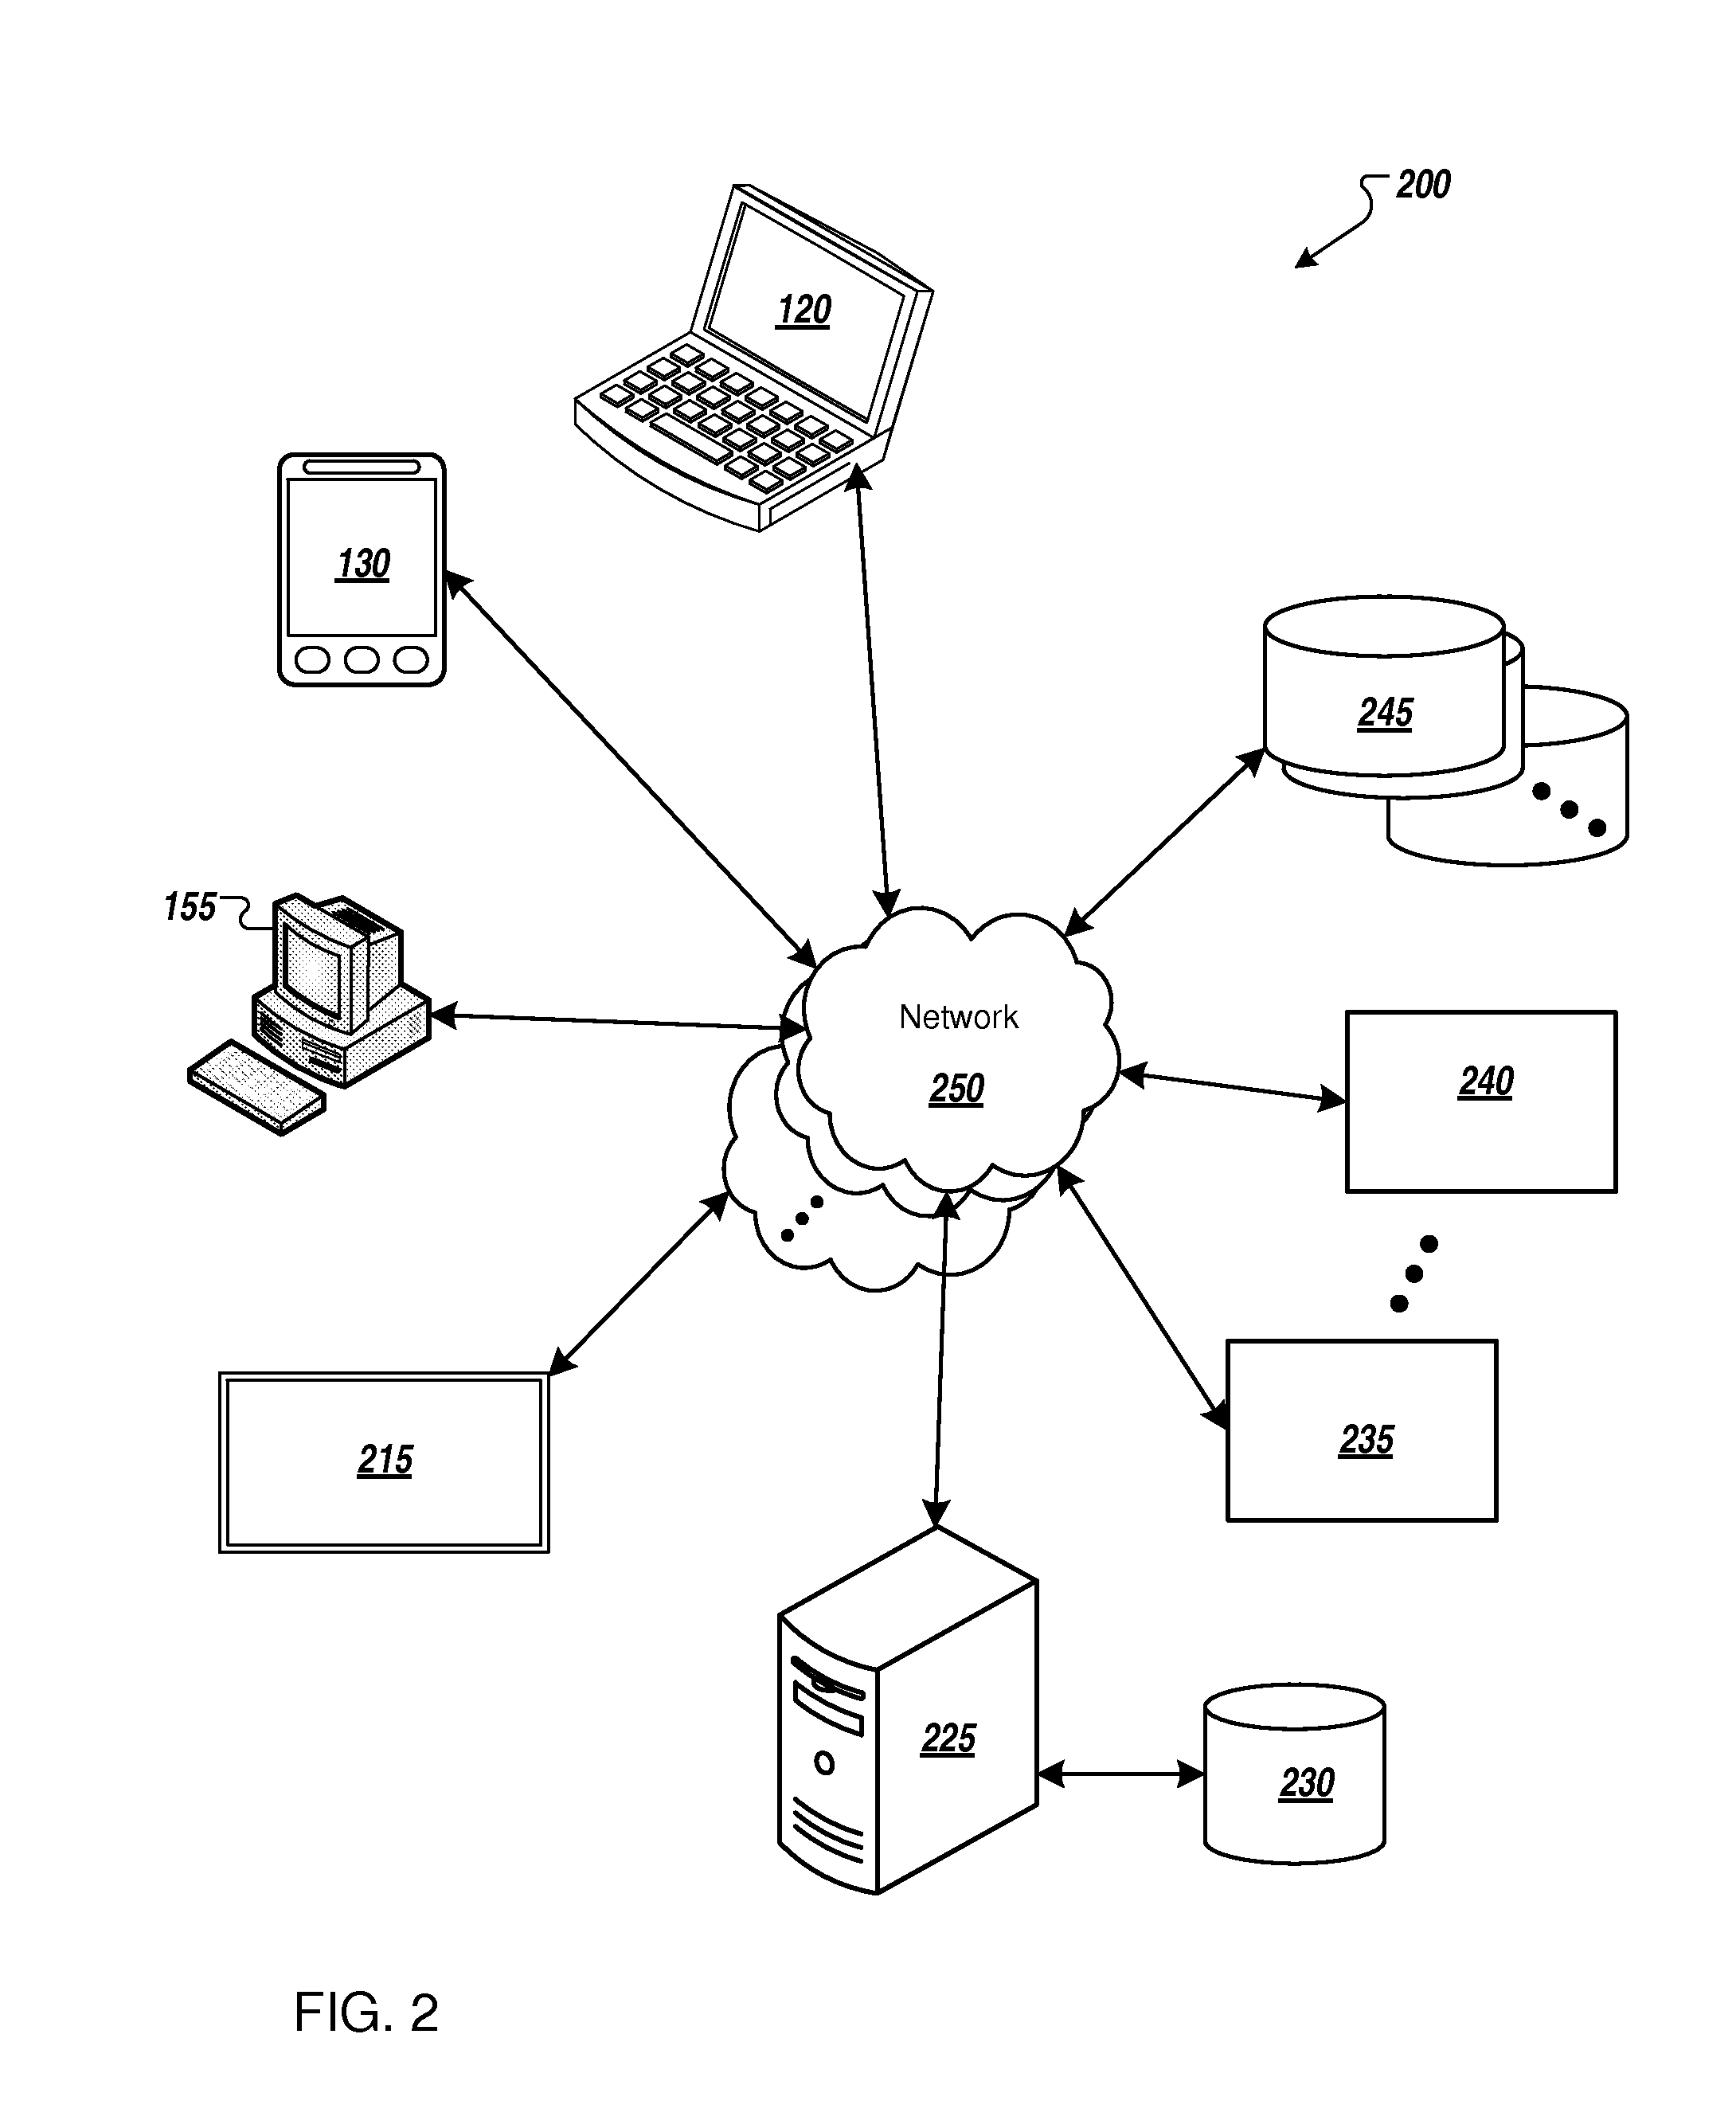 Systems and methods for automatically logging into a user account